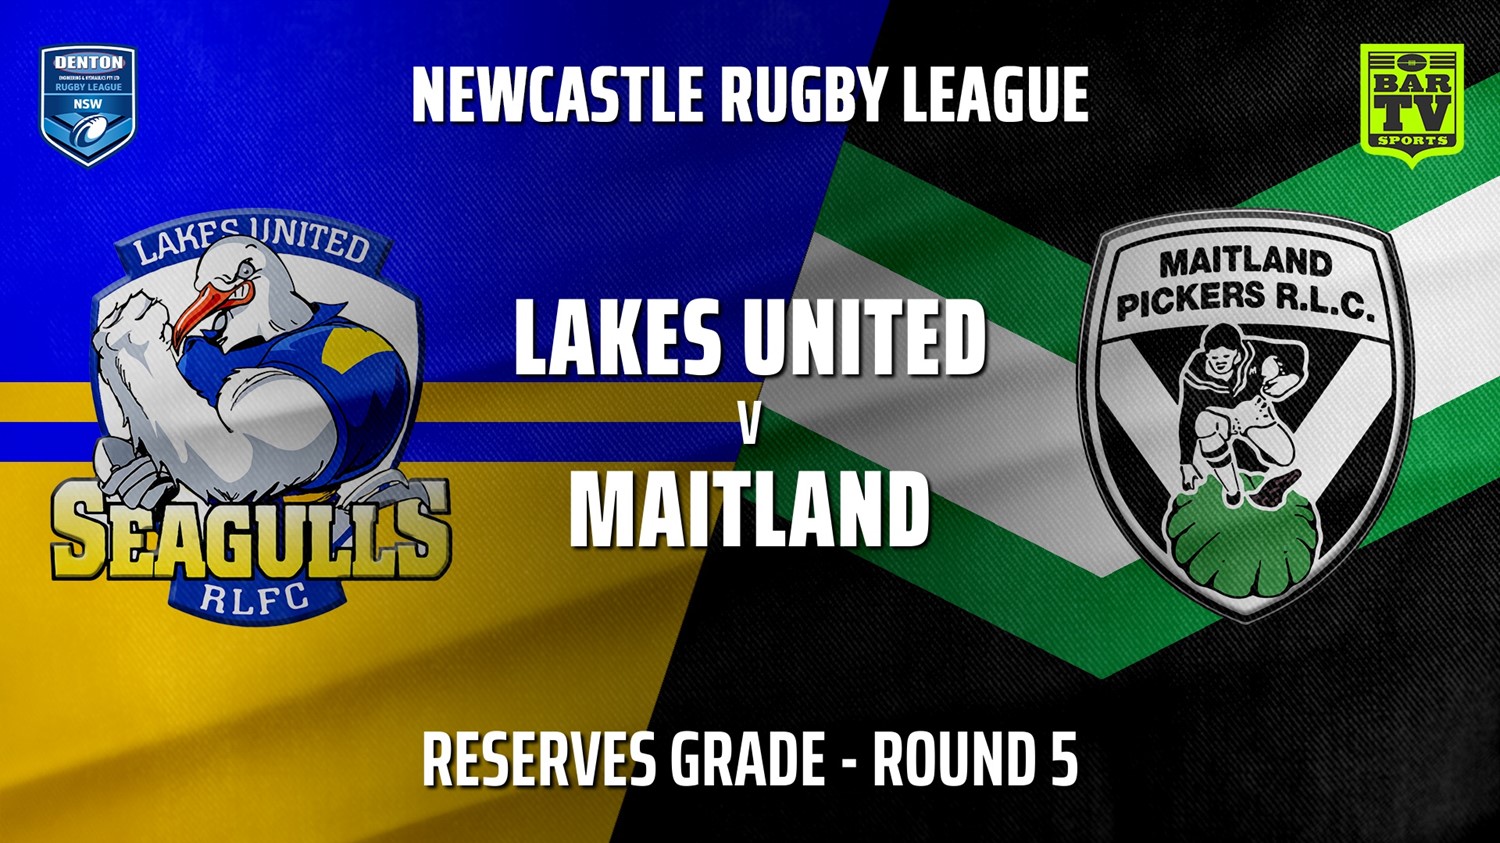 210422-Newcastle Rugby League Round 5 - Reserves Grade - Lakes United v Maitland Pickers Slate Image